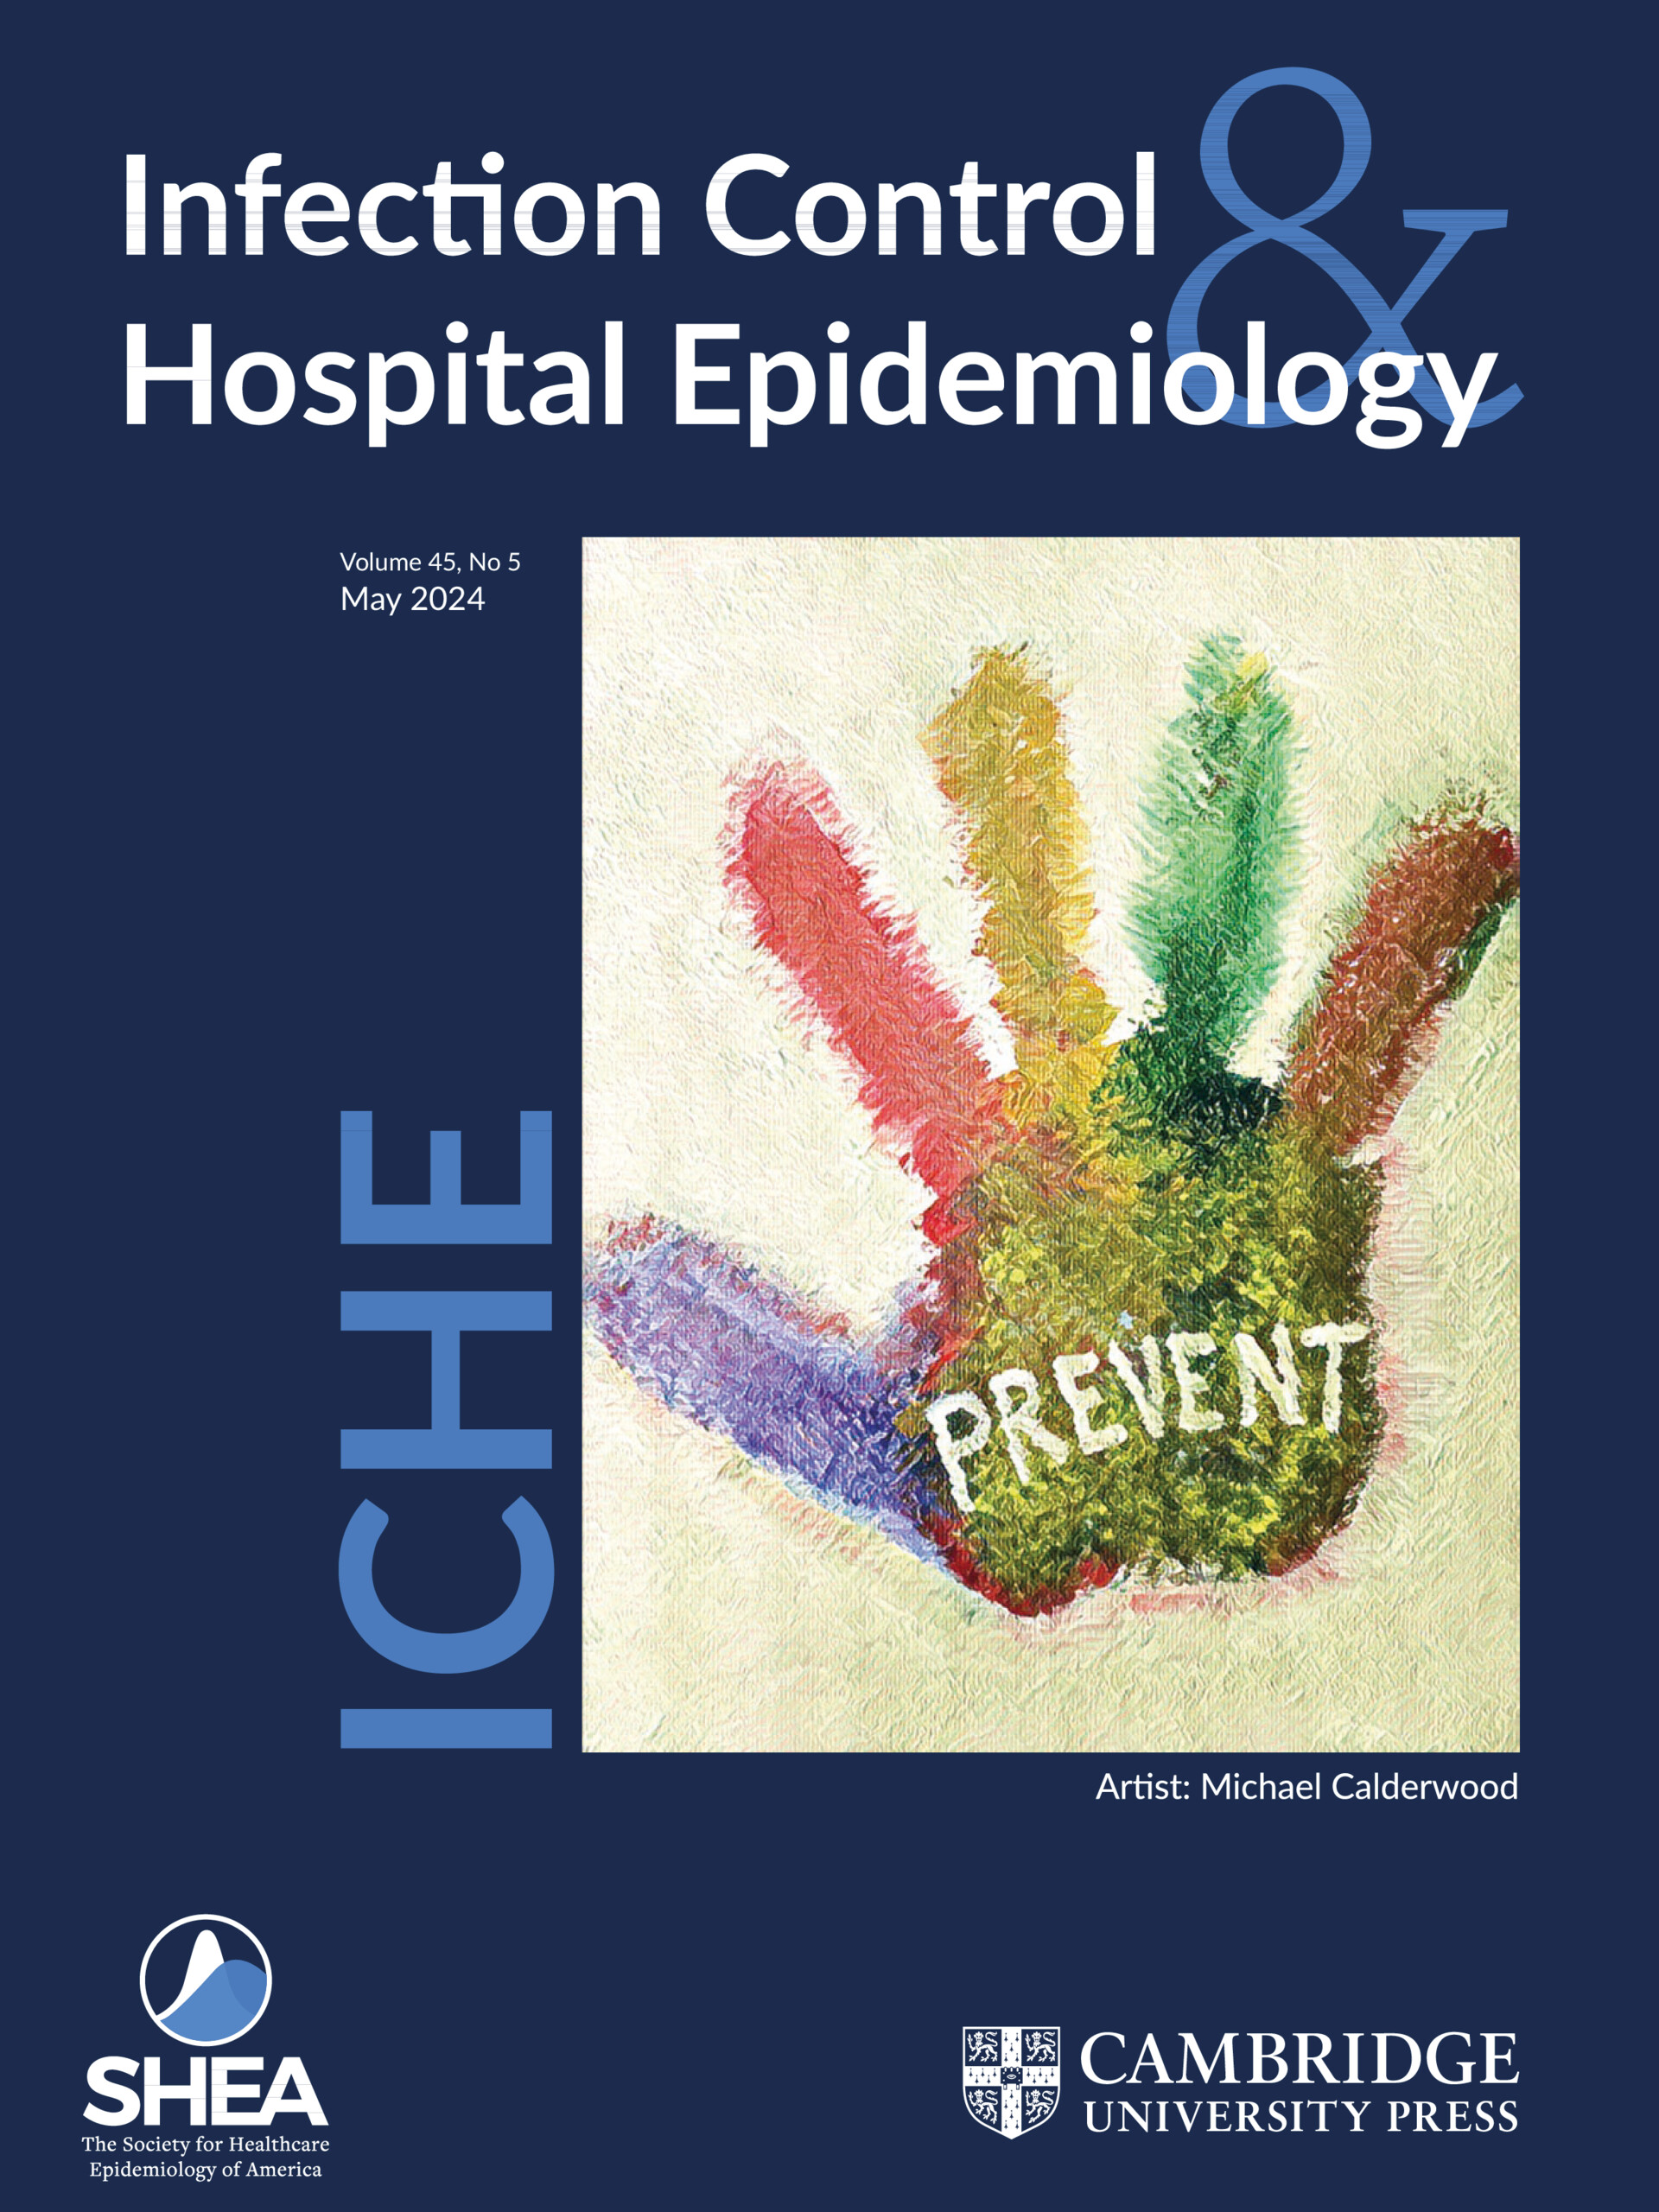 Strategies to prevent surgical site infections in acute-care hospitals:  2022 Update, Infection Control & Hospital Epidemiology